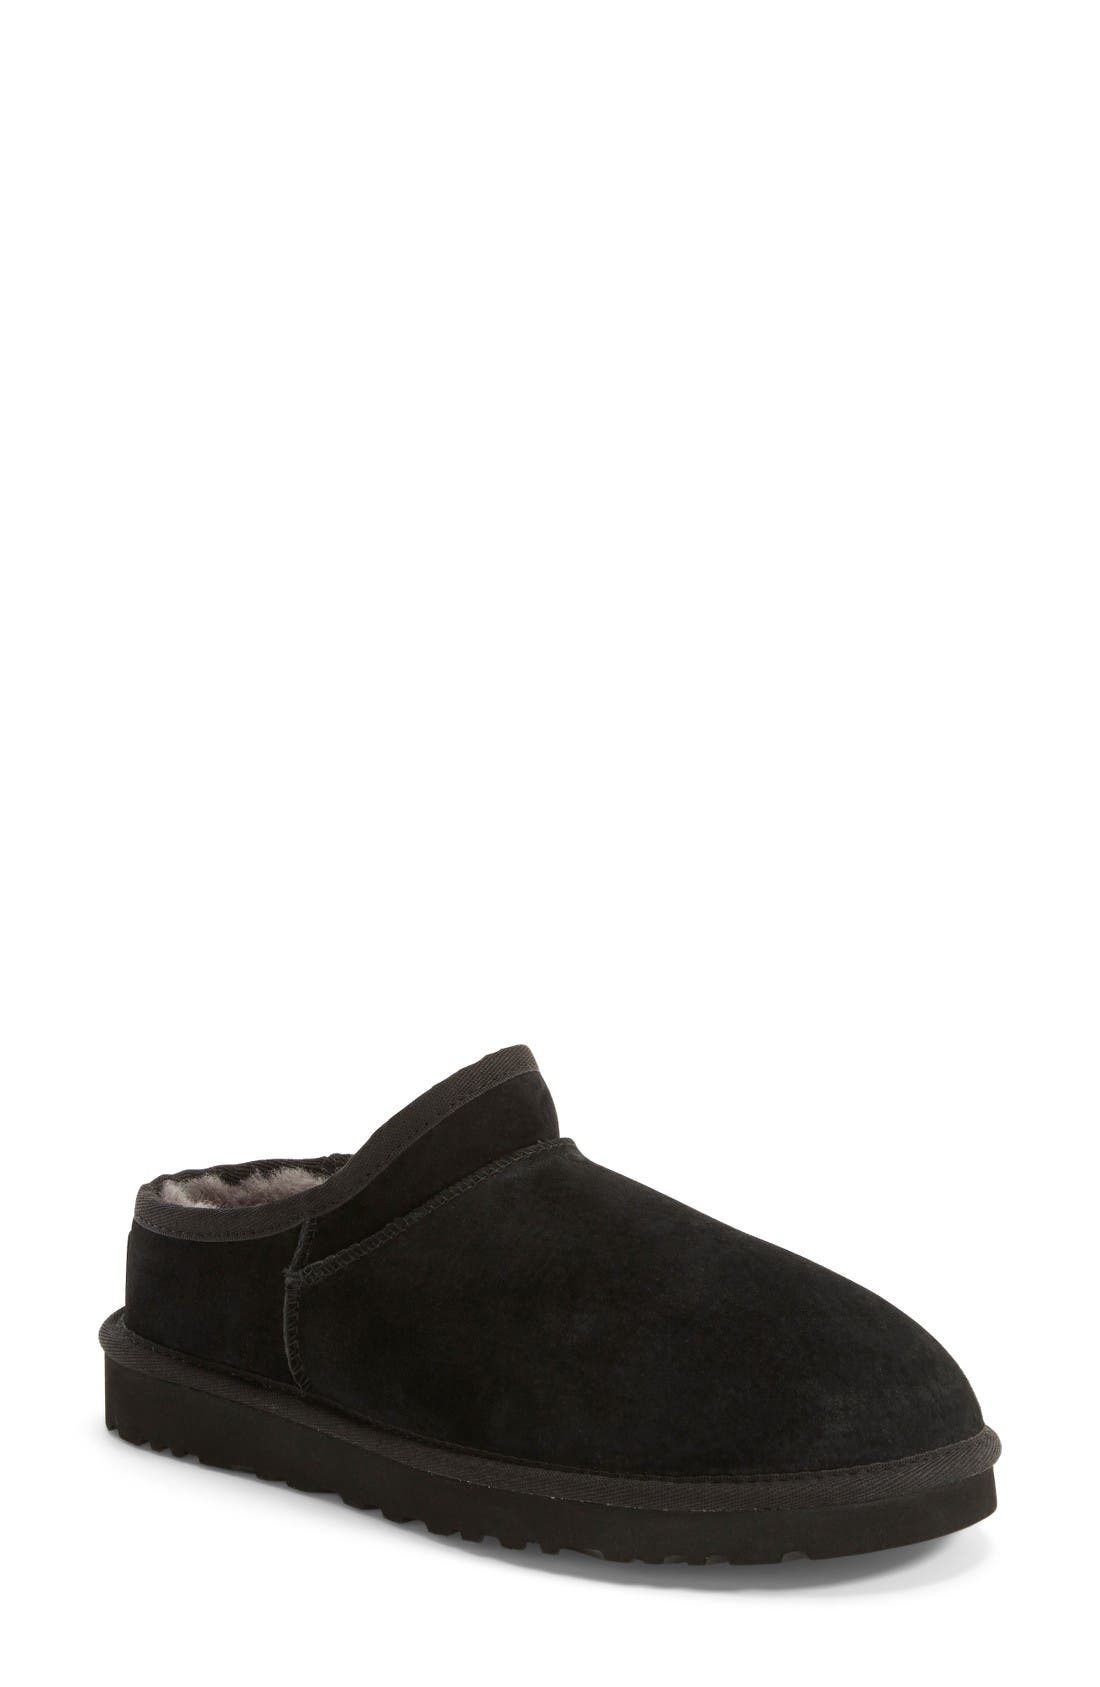 classic water resistant slipper ugg